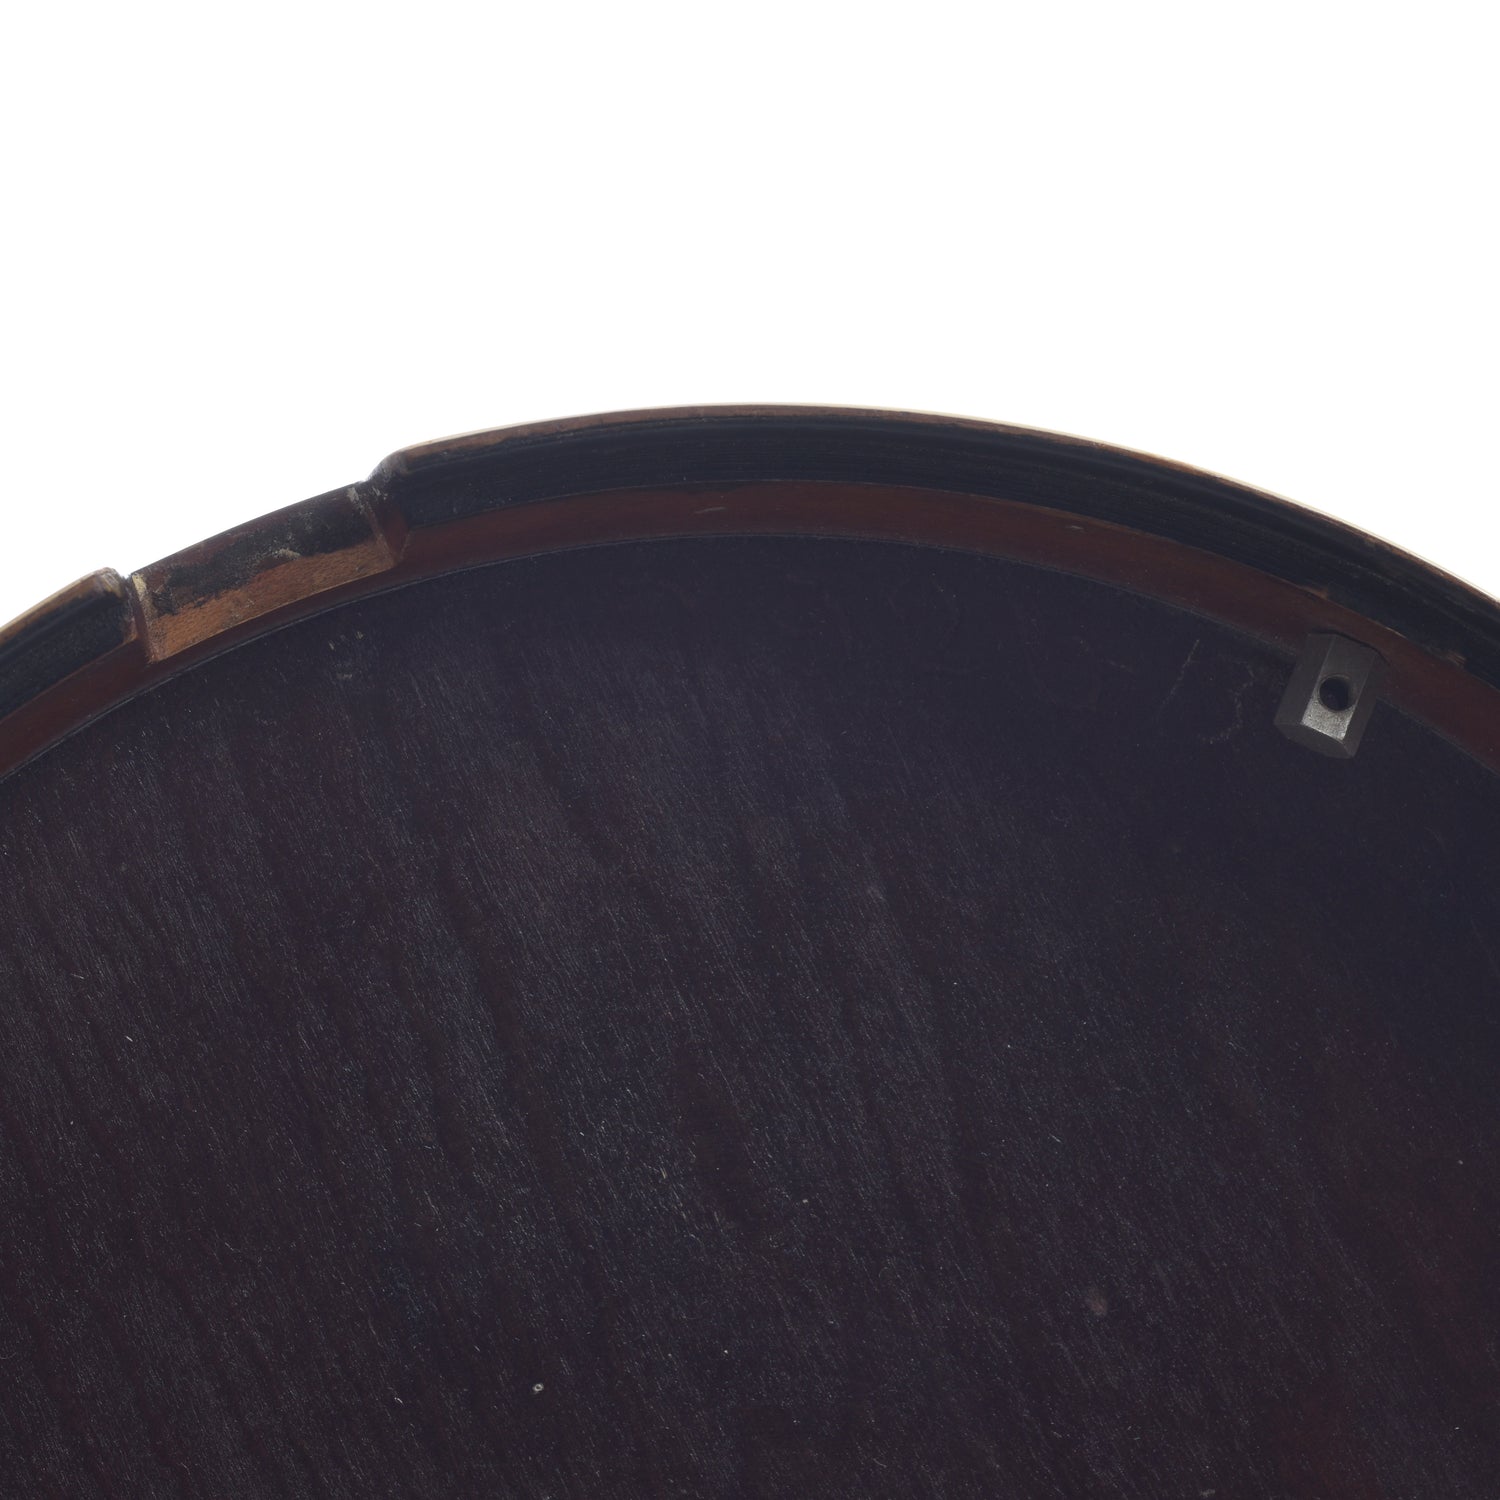 Serial number written on inside back of resonator of Gibson TB-3 Conversion Banjo